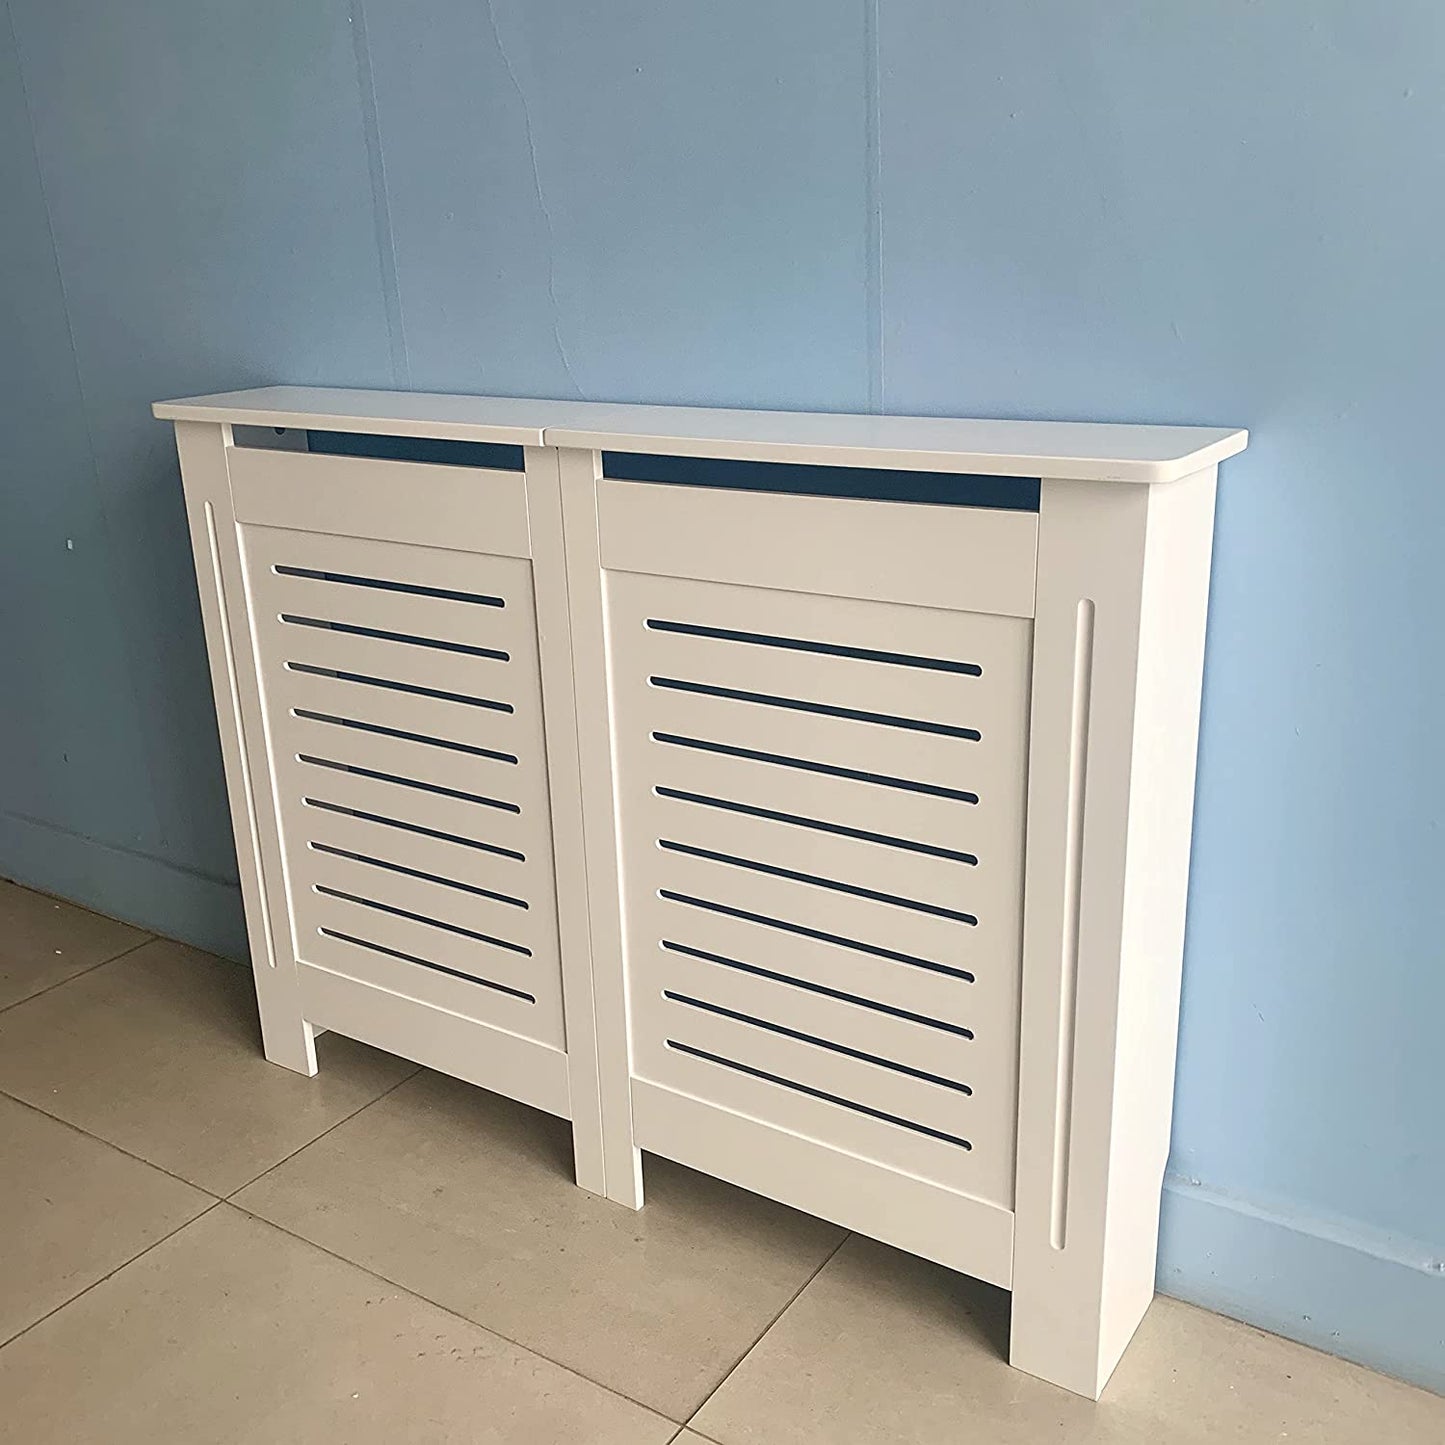 White Wooden Horizontal Slanted Radiator Cover Grill Cabinet Panel Shelf Hallway Furniture In 3 Sizes